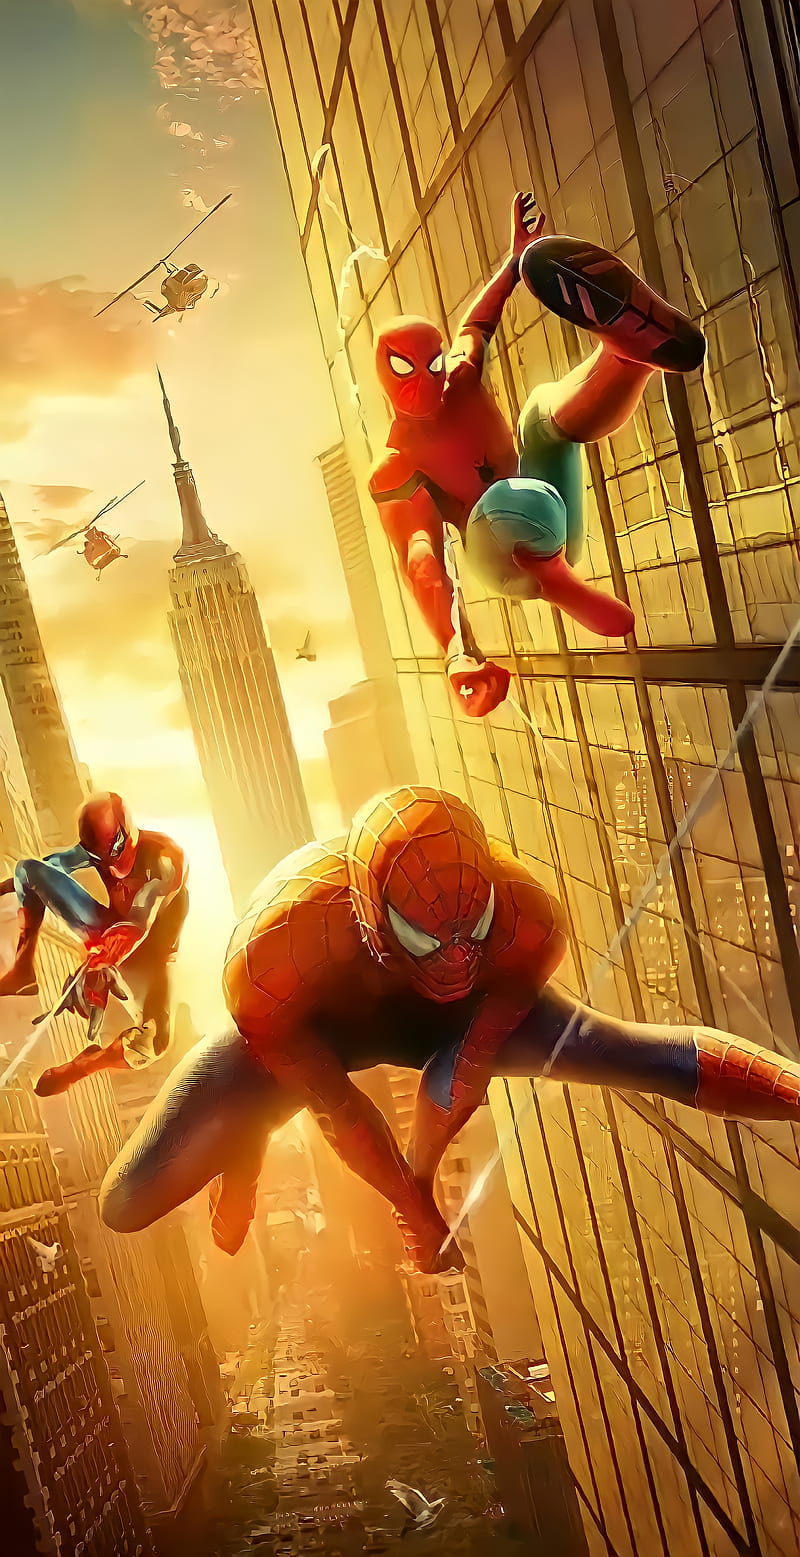 Spider-Man: No Way Home for windows download free